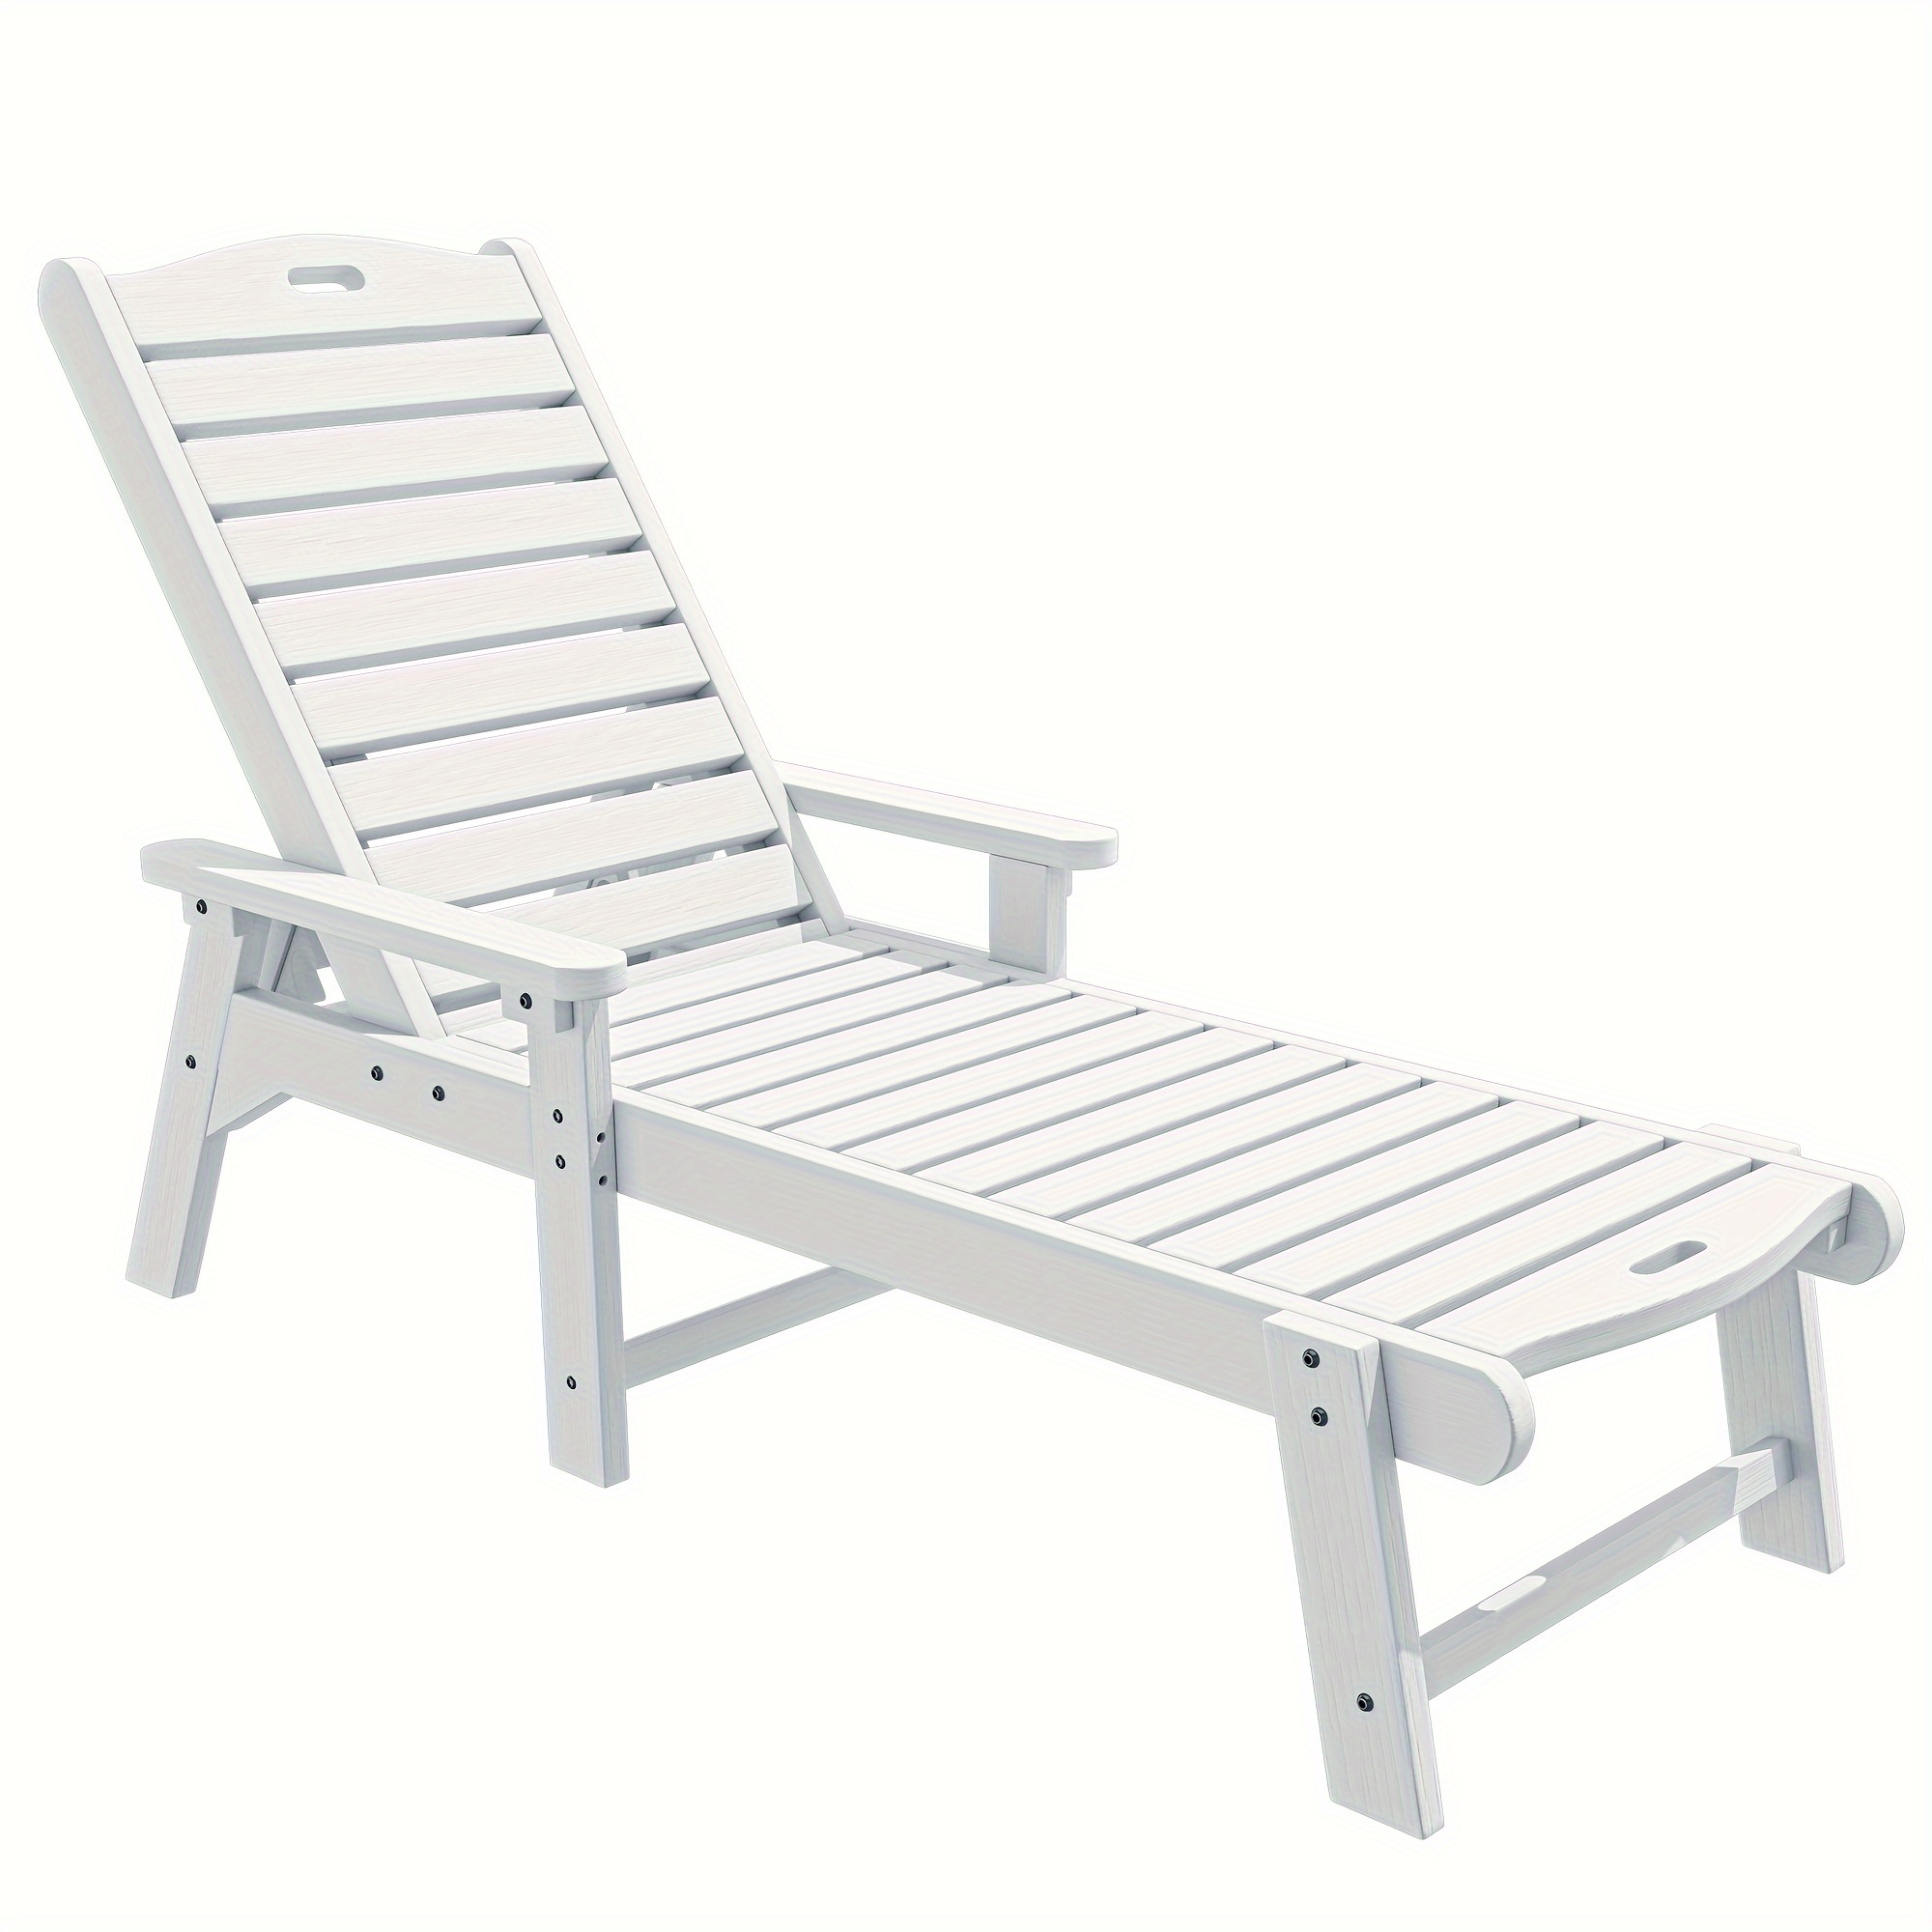 

Gardnfun 1pc Outdoor Chaise Lounge Chair With Adjustable Backrest, Heavy Duty Resin Patio Lounger With Wide Armrest And 350lbs Capacity For Outside Poolside Beach Backyard, Waterproof, White